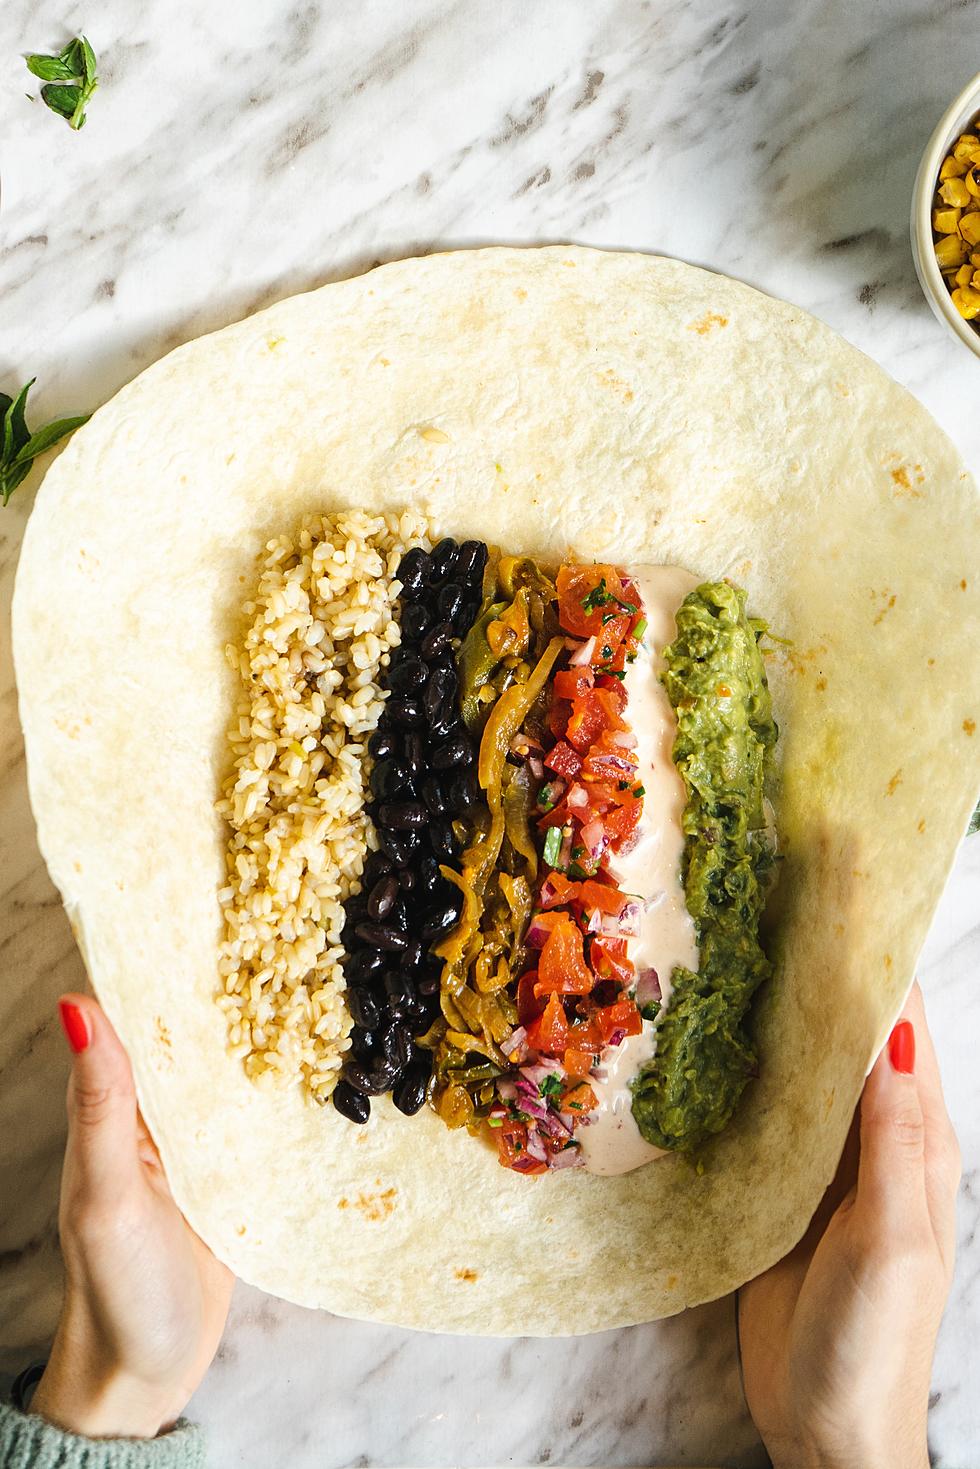 Yum! Find Out Where To Get The BEST Burrito in New Jersey